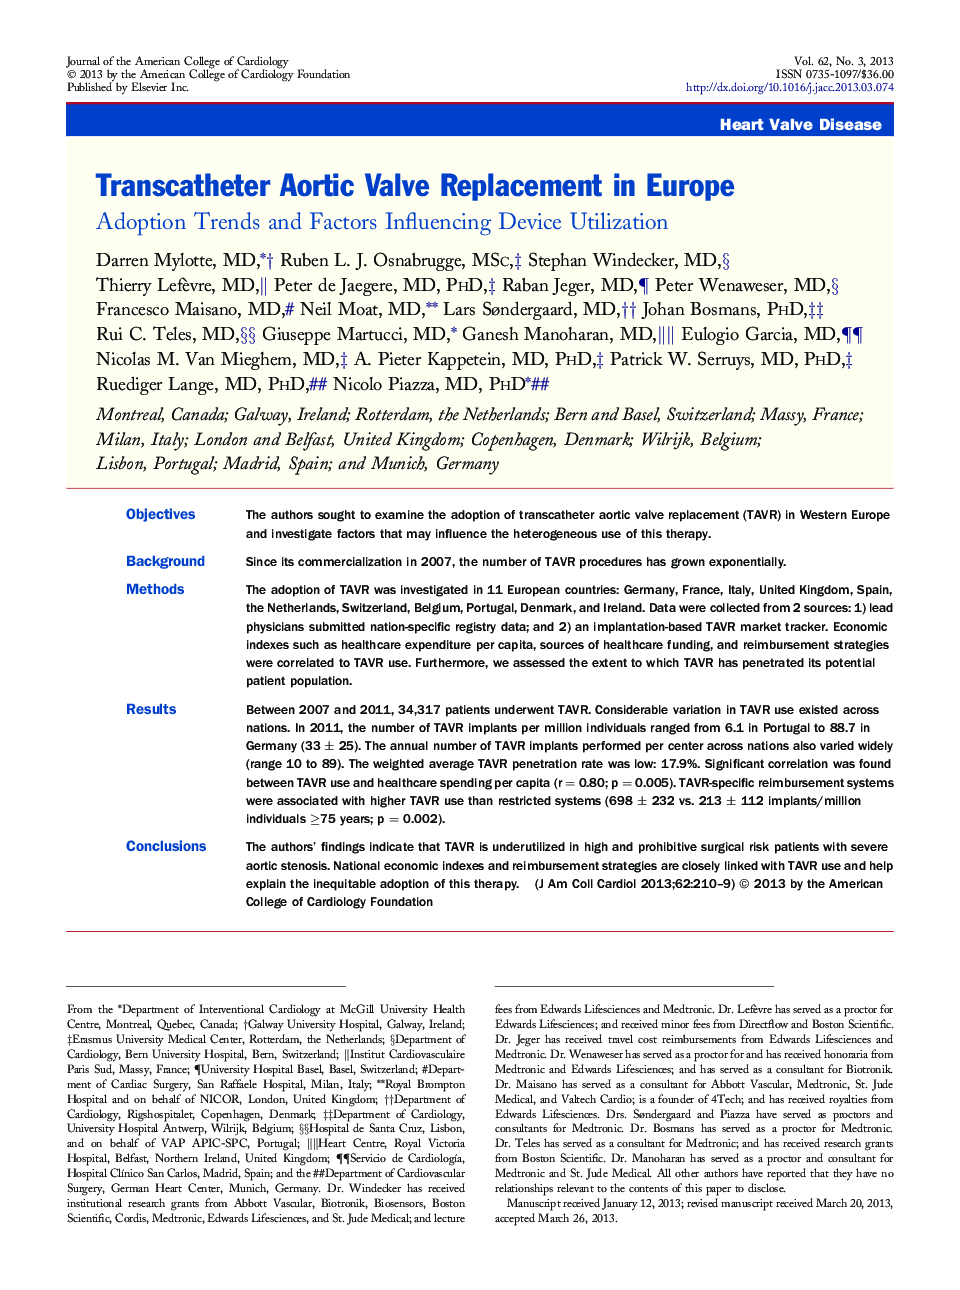 Transcatheter Aortic Valve Replacement in Europe: Adoption Trends and Factors Influencing Device Utilization